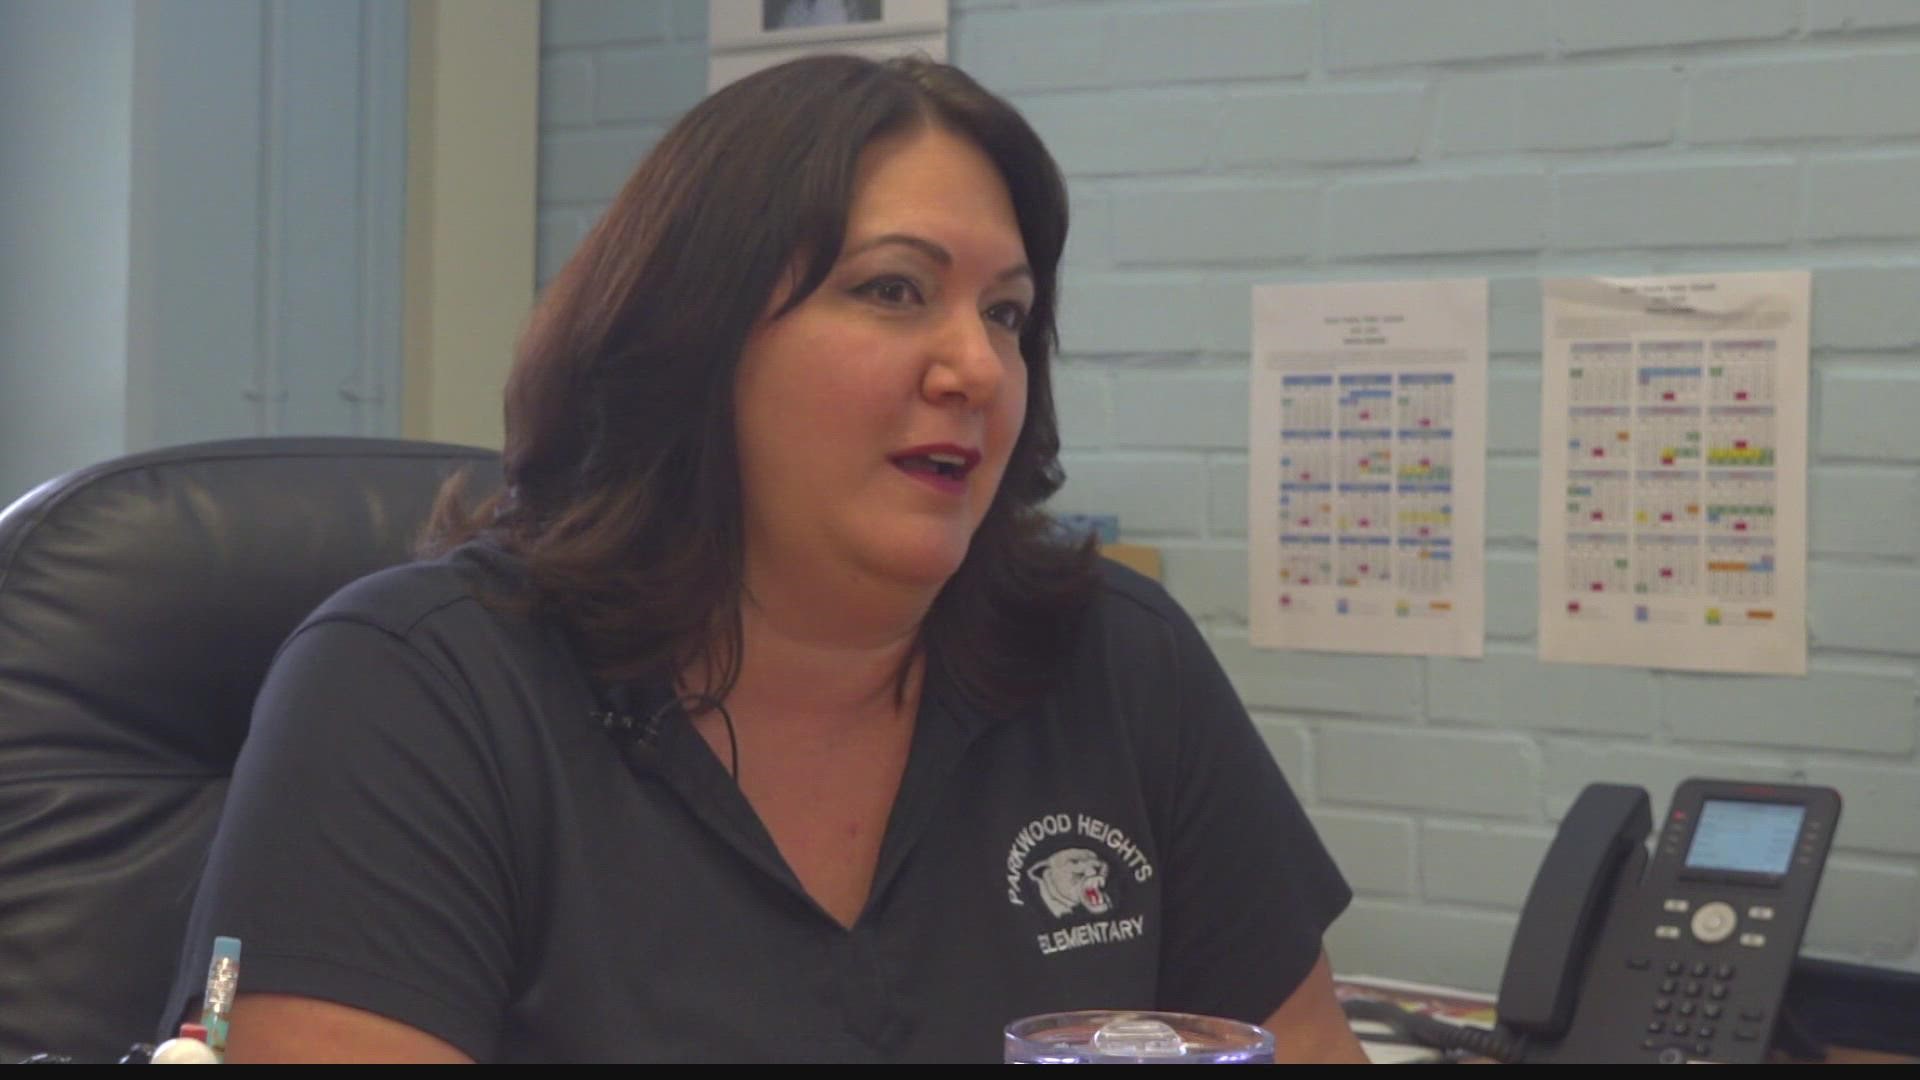 Assistant principal DeLayna Simpson says her teachers often spend money out of their own pockets for supplies like pencils, markers and binders.